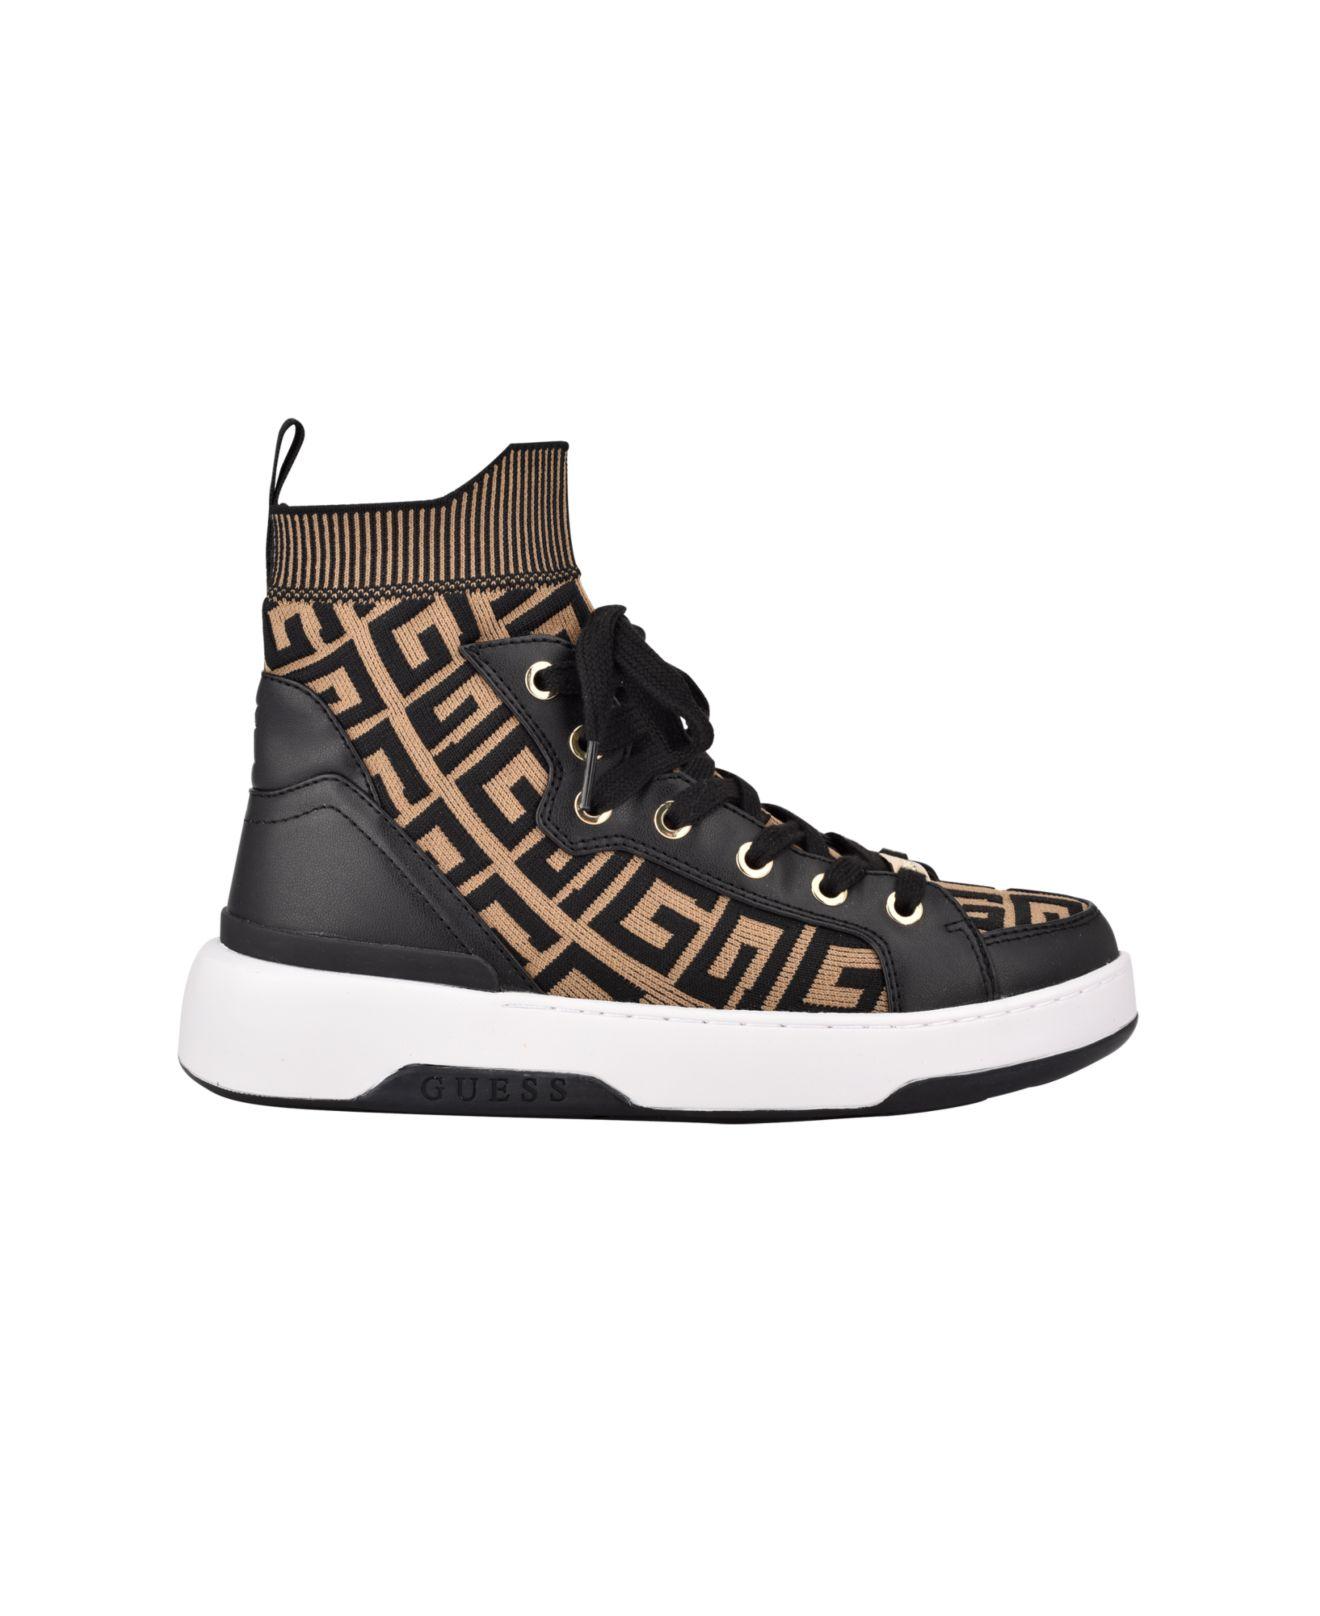 Guess Manney High Top Logo Sneaker in Black | Lyst